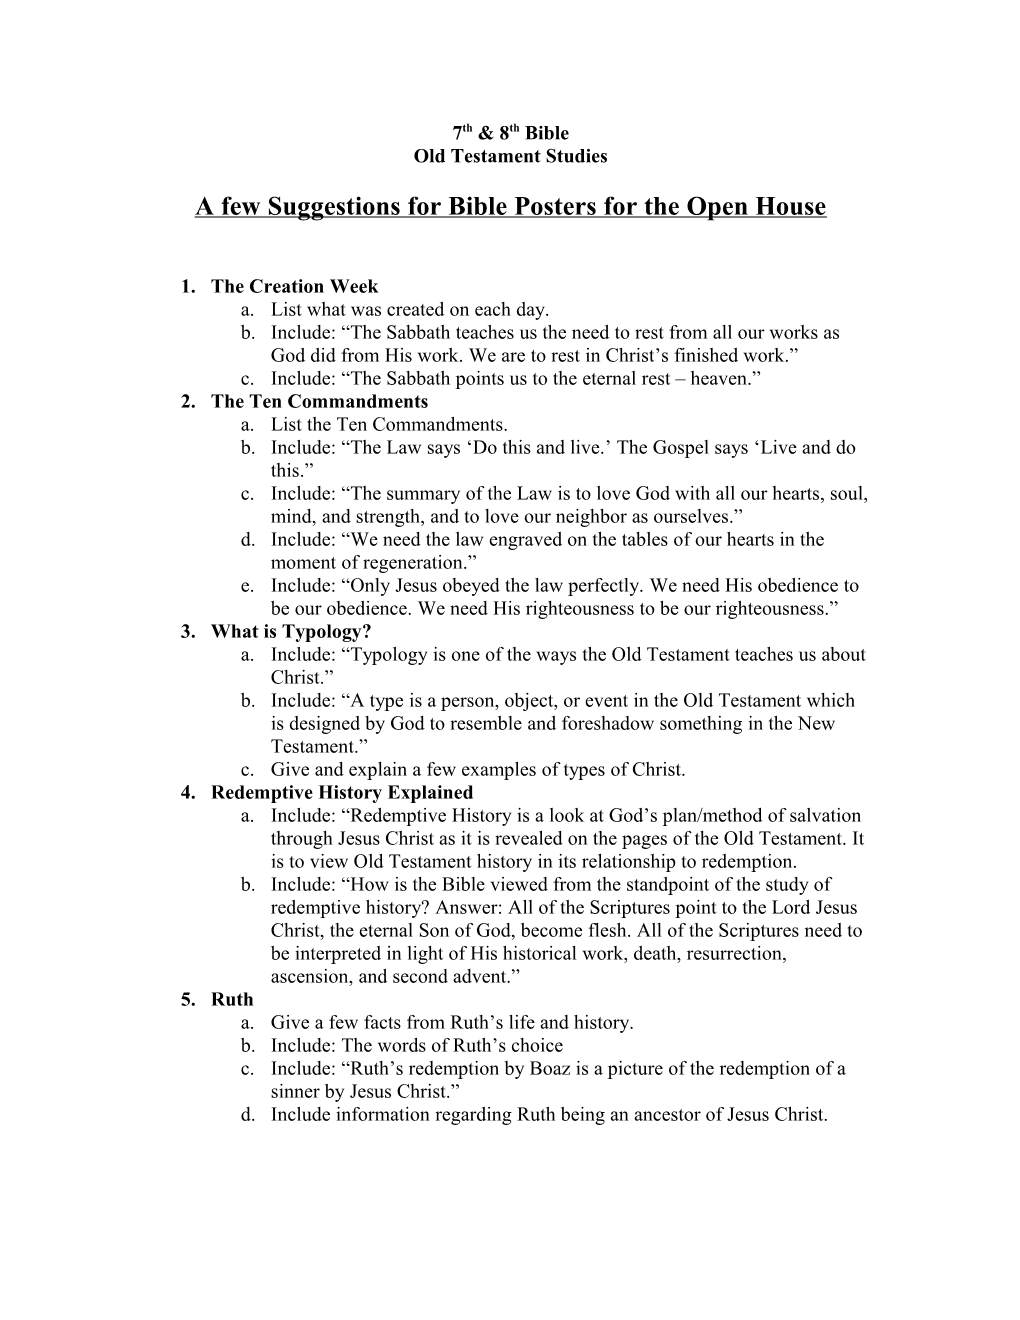 A Few Suggestions for Bible Posters for the Open House